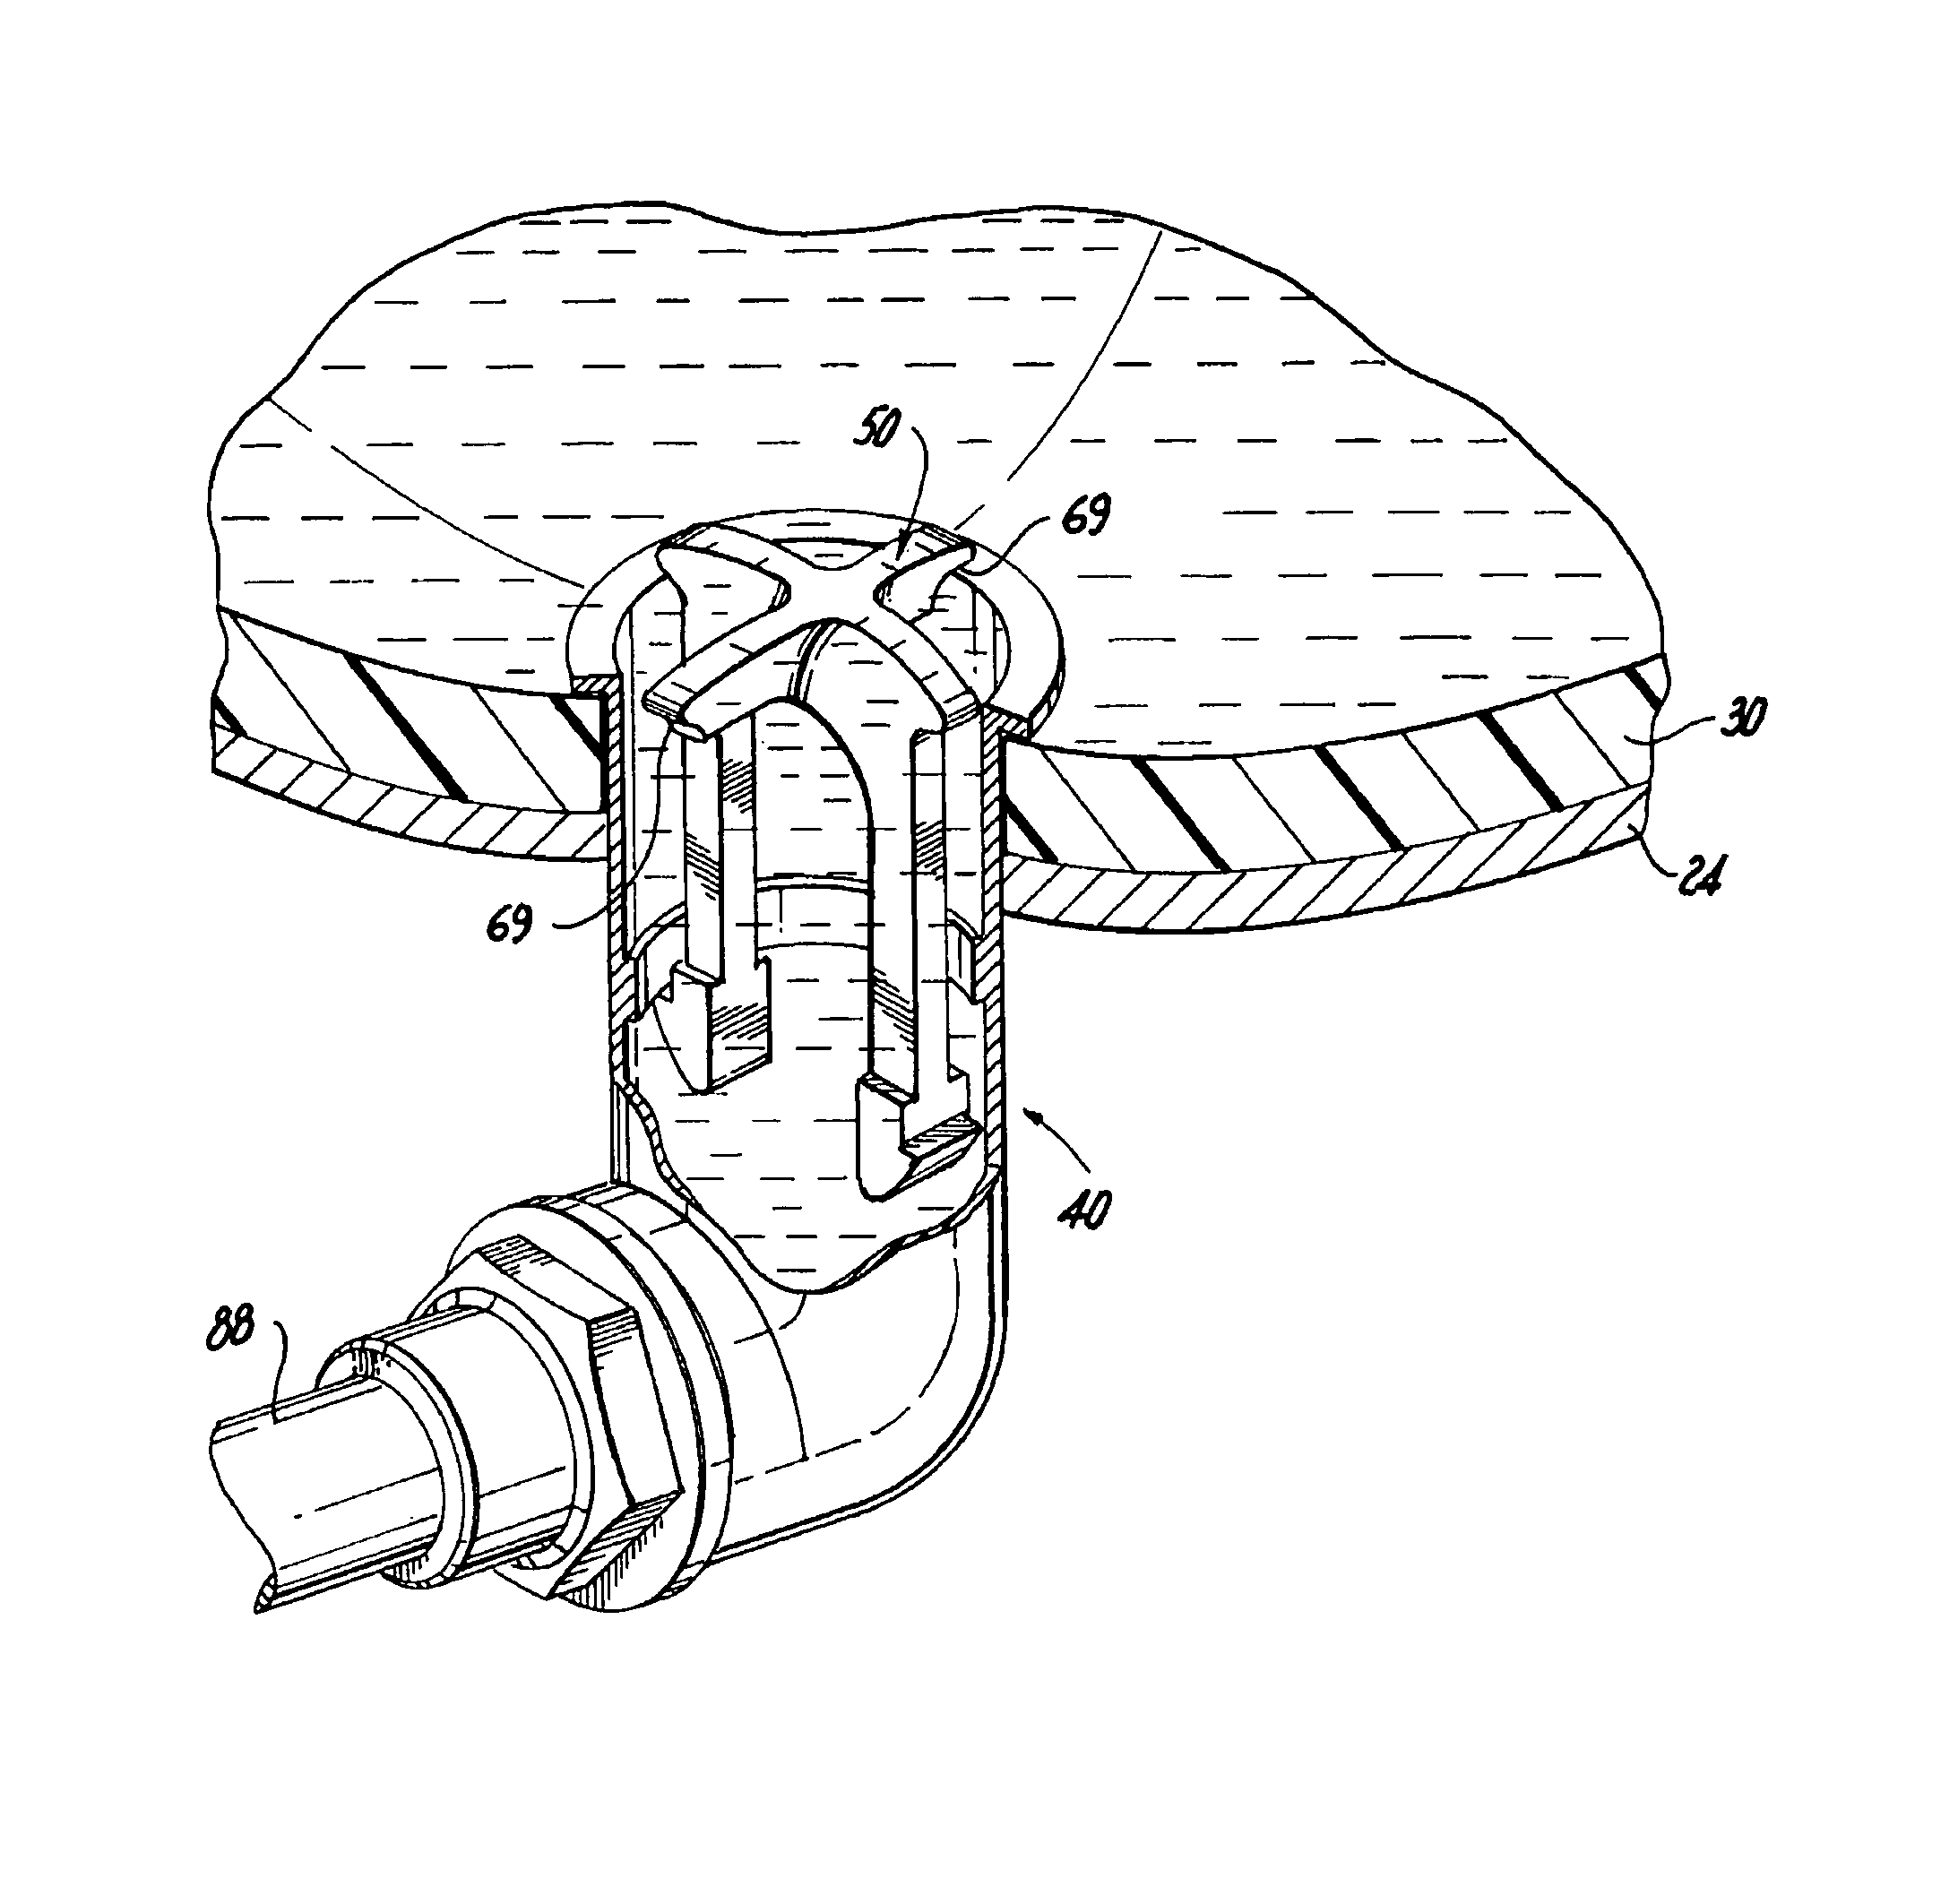 Device for causing turbulent flow in a tank assembly